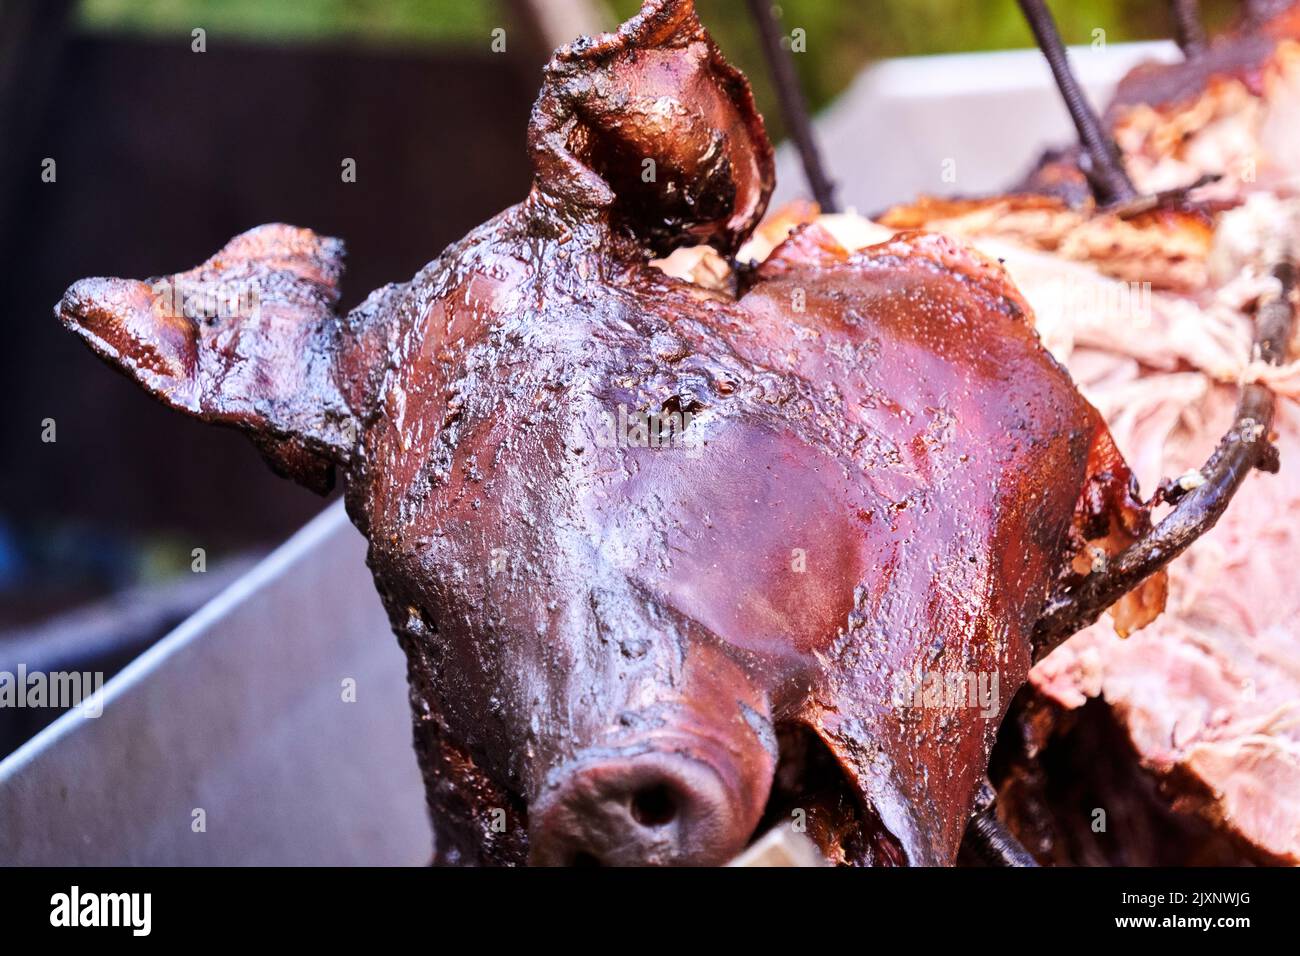 Dark marinated head of a pig cooking on a rotisserie grill Stock Photo